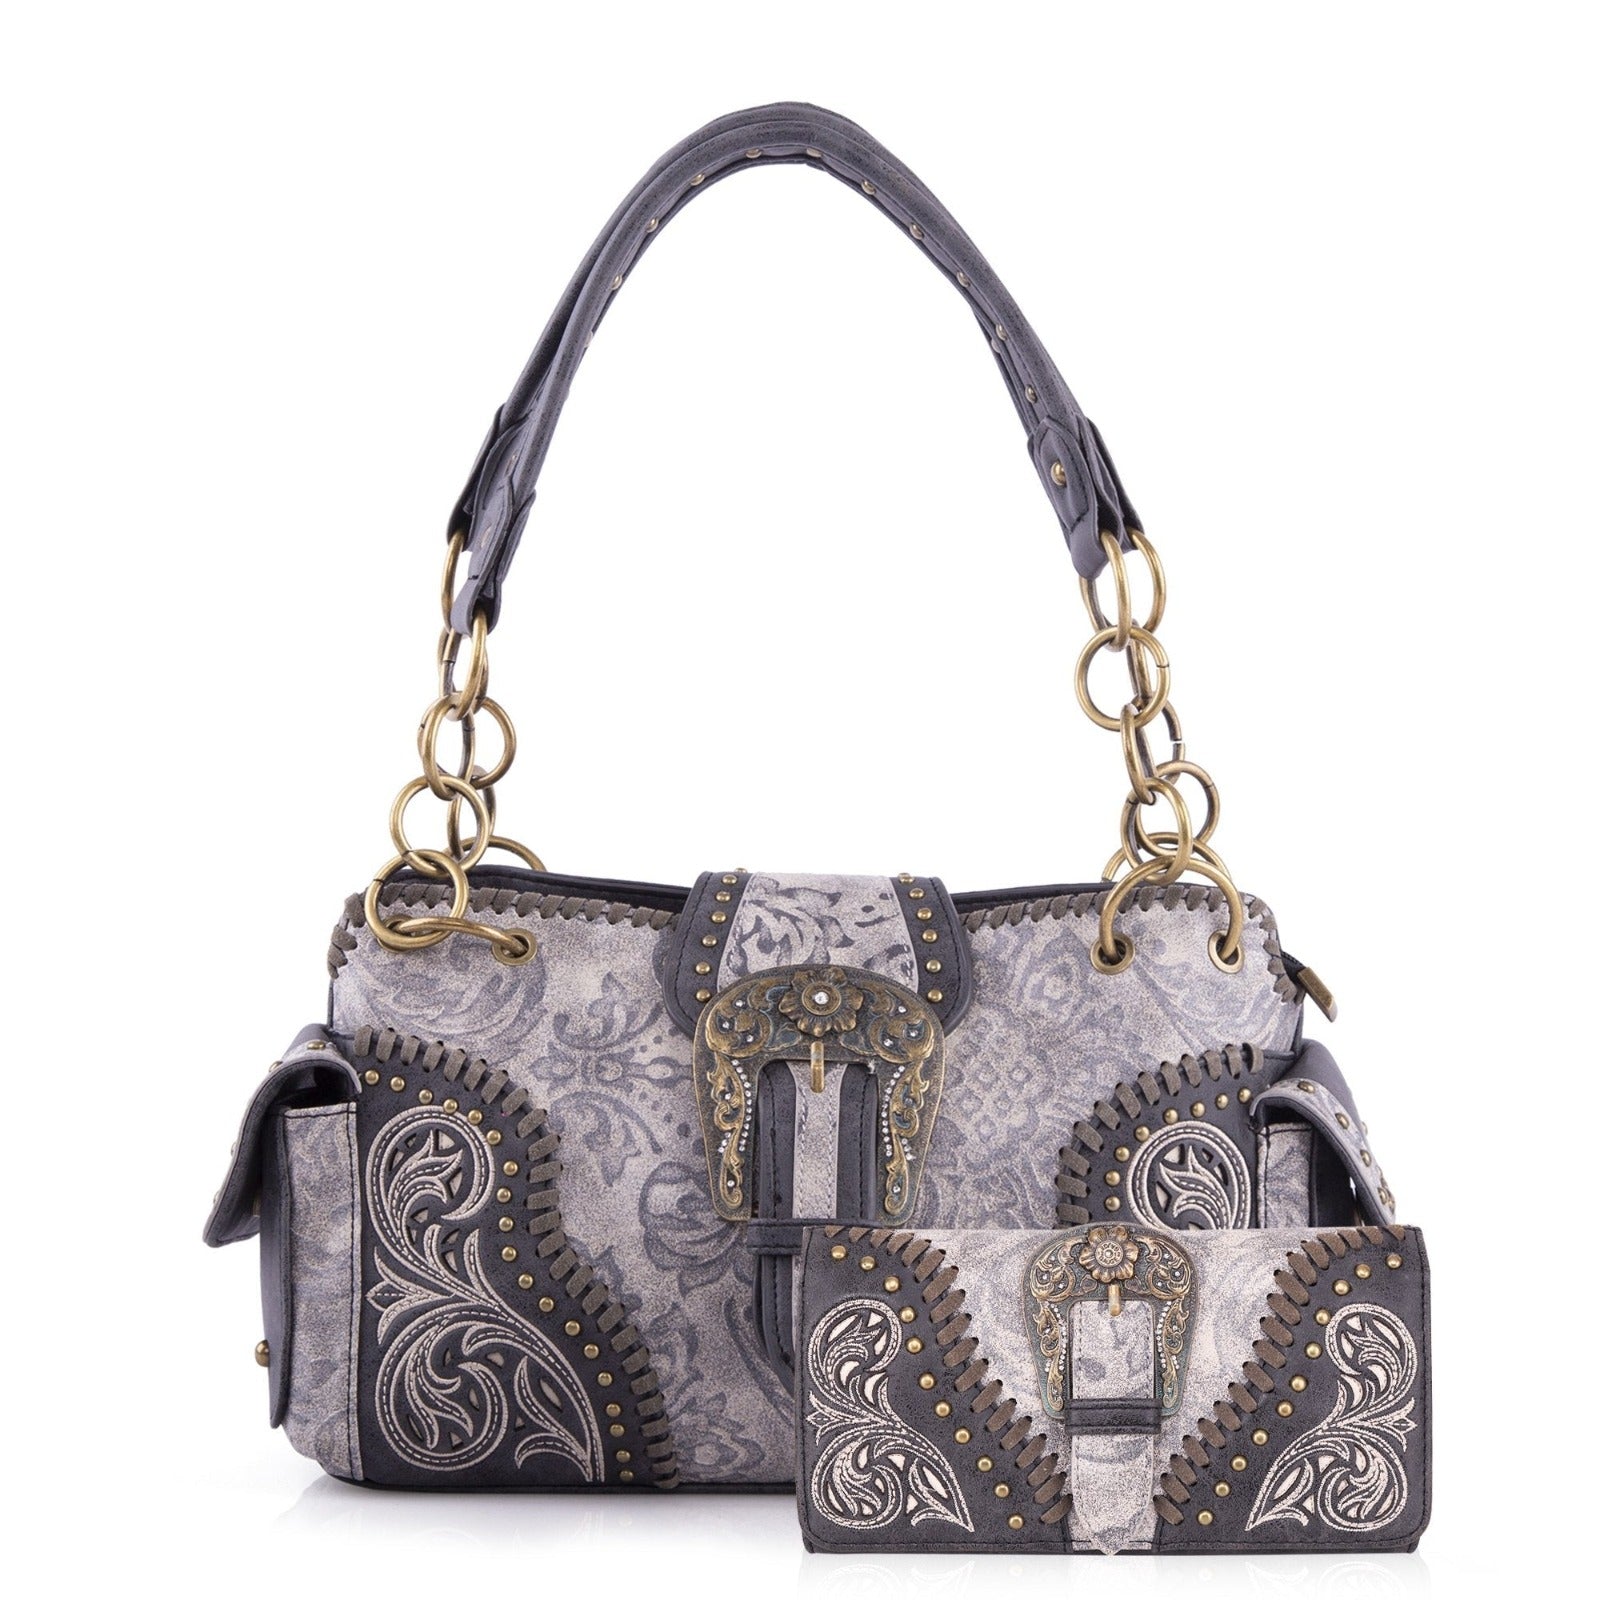 Lady Conceal Jessica Satchel Concealed Carry - Algeria | Ubuy